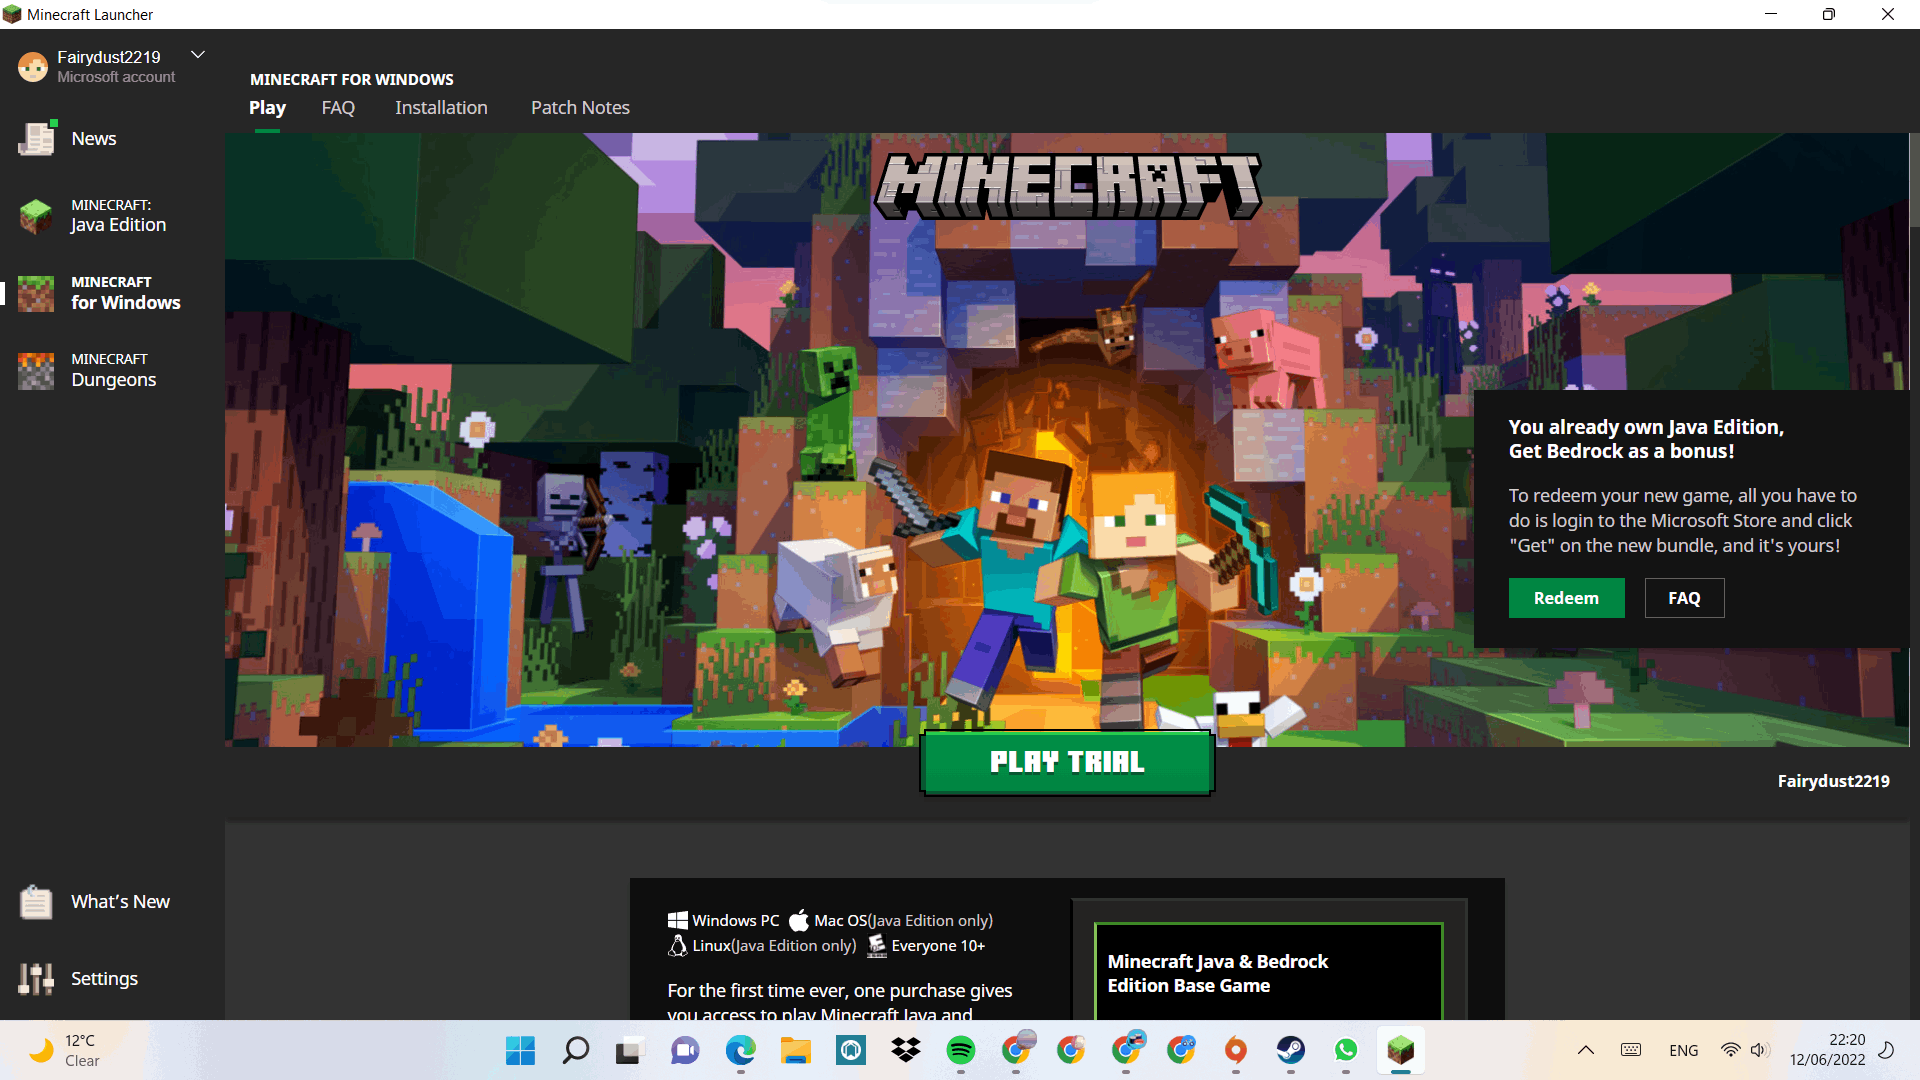 Hi, I have minecraft java edition and few months ago they released bedrock  for free if u had java, so I downloaded it. then today, this message saying  this suddenly appears on